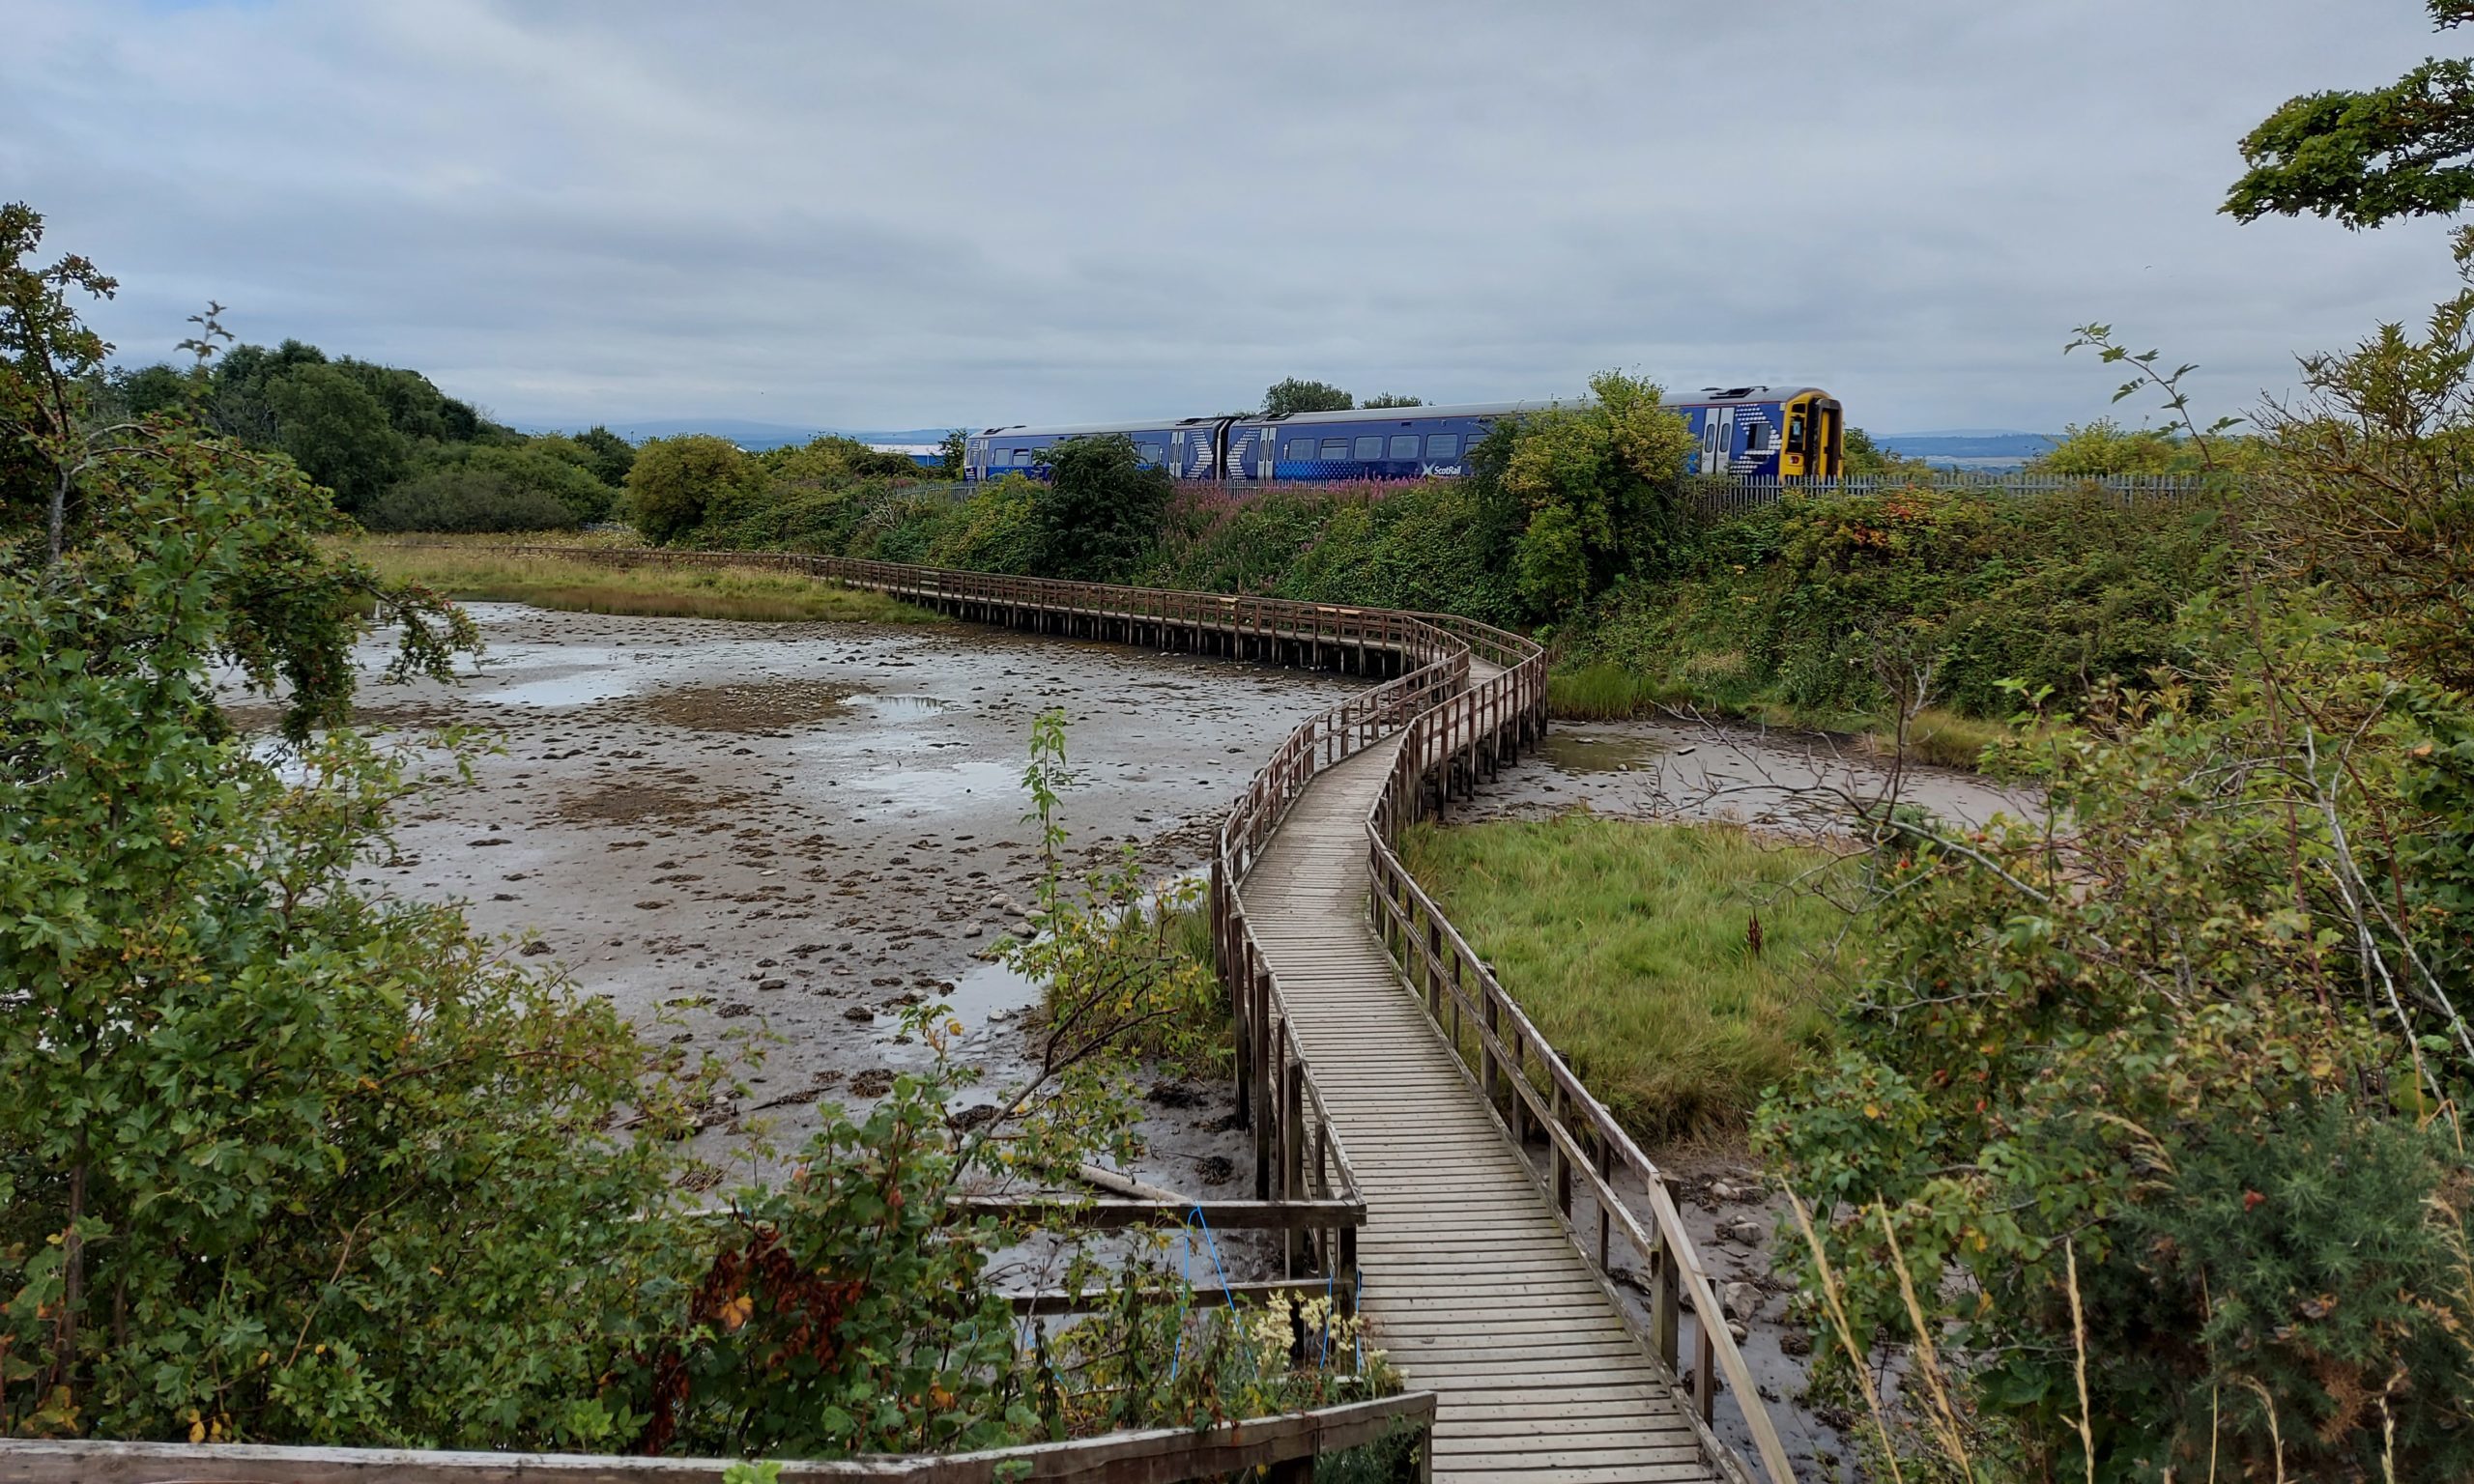 The boardwalk at Merkinch Local Nature Reserve was at risk of closure.